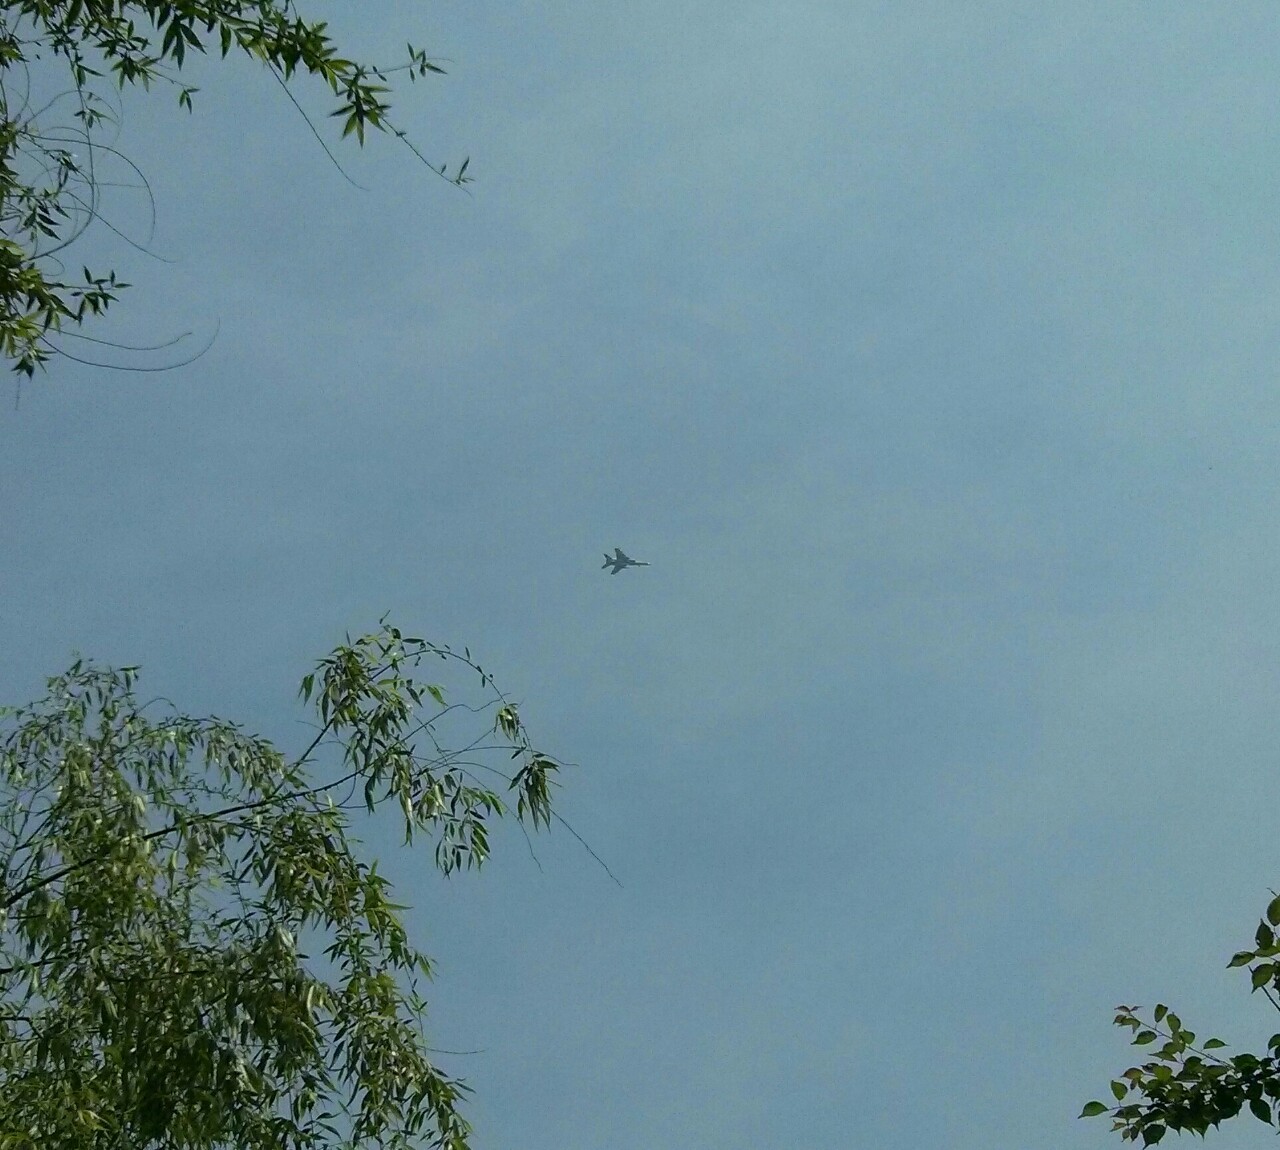 There is an old civilian airbase turned People’s Liberation Army Air Force Base called Hangzhou Jianqiao Airport very close to where I am in Hangzhou. Over the past five days, I’ve probably seen and heard close to 100 sorties flown overhead. If you...